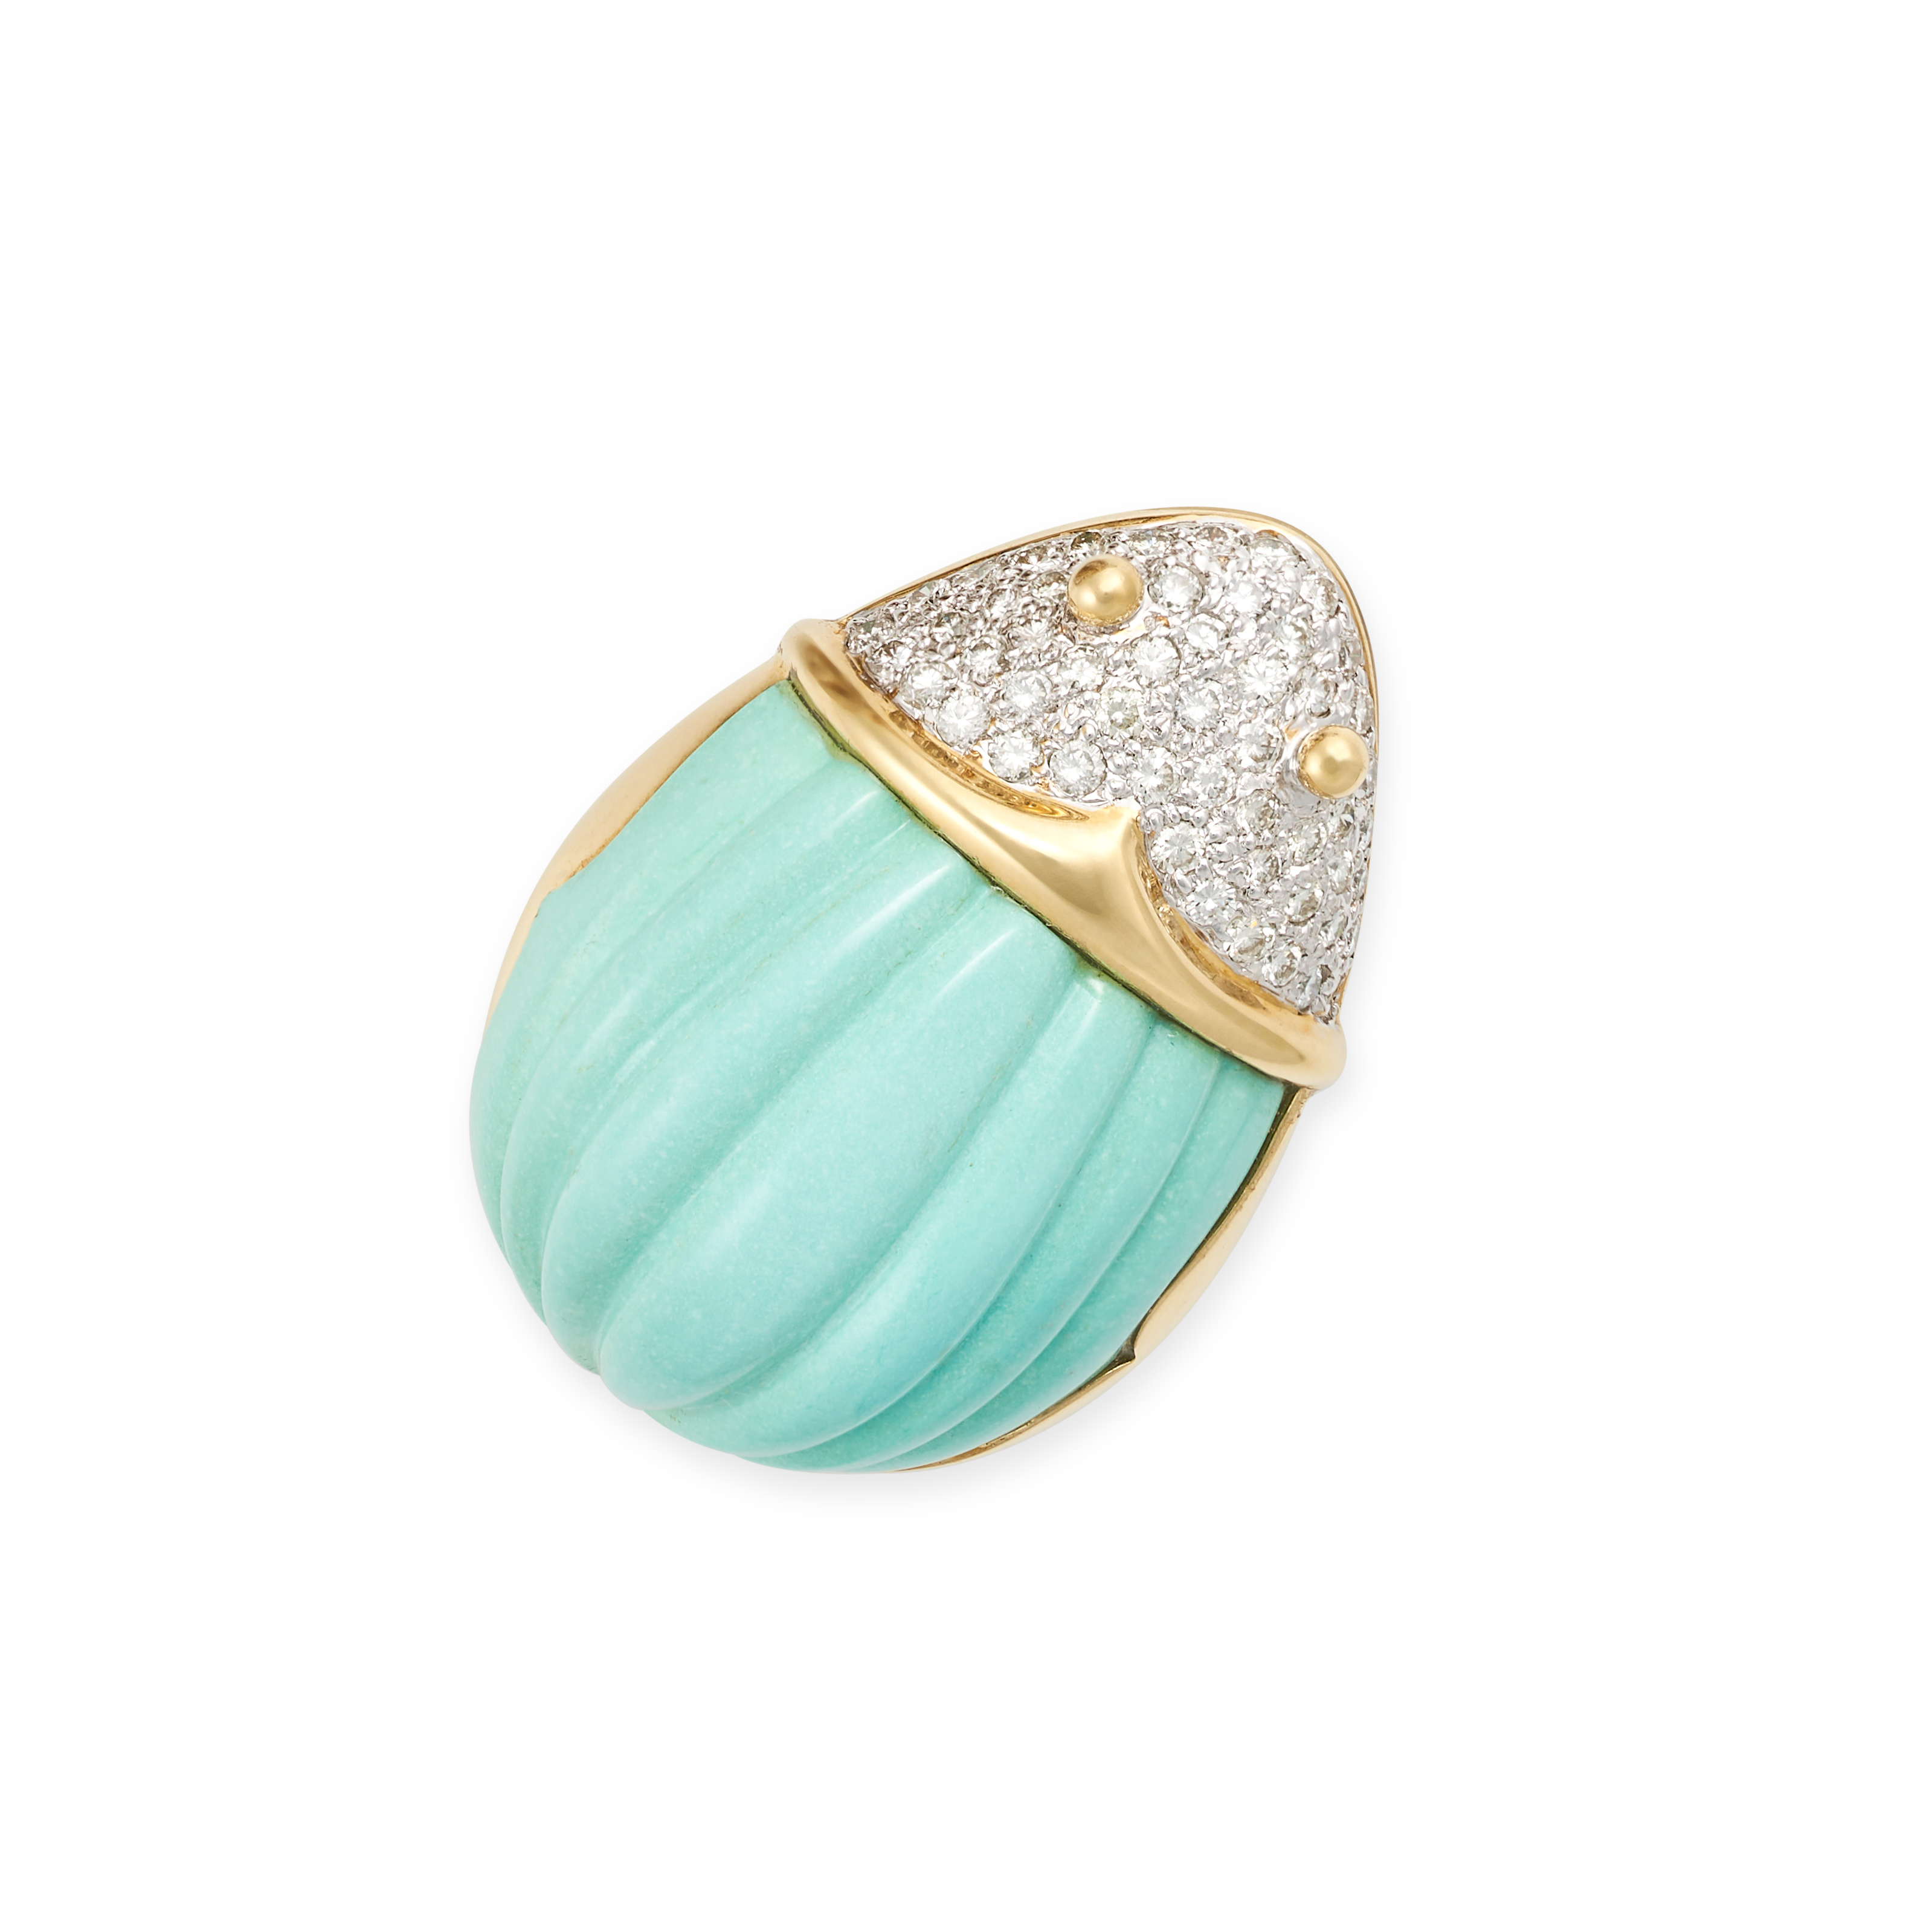 A VINTAGE TURQUOISE AND DIAMOND BEETLE BROOCH in 18ct yellow gold, the body set with a carved tur...